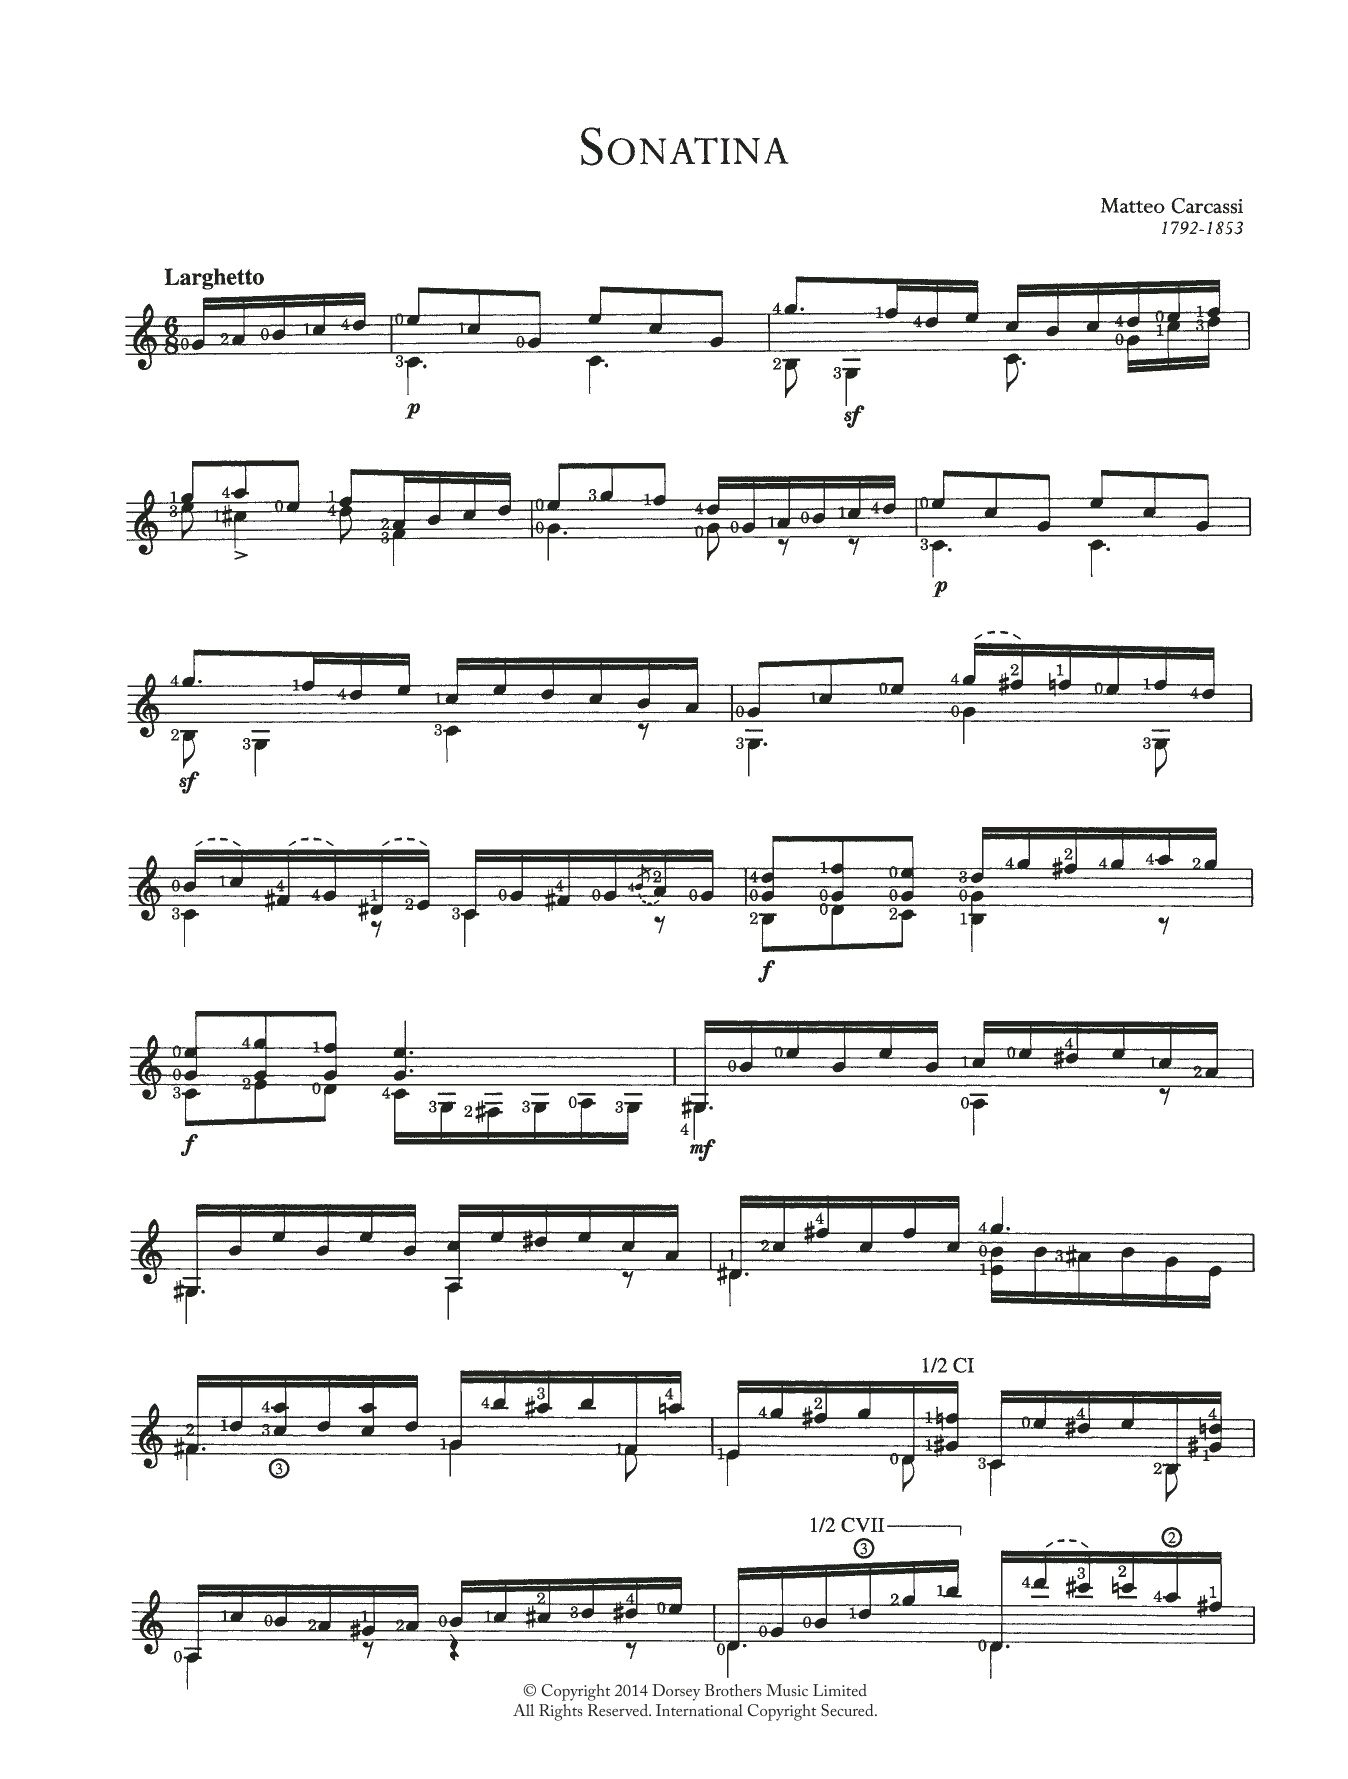 Matteo Carcassi Sonatina sheet music preview music notes and score for Guitar including 2 page(s)